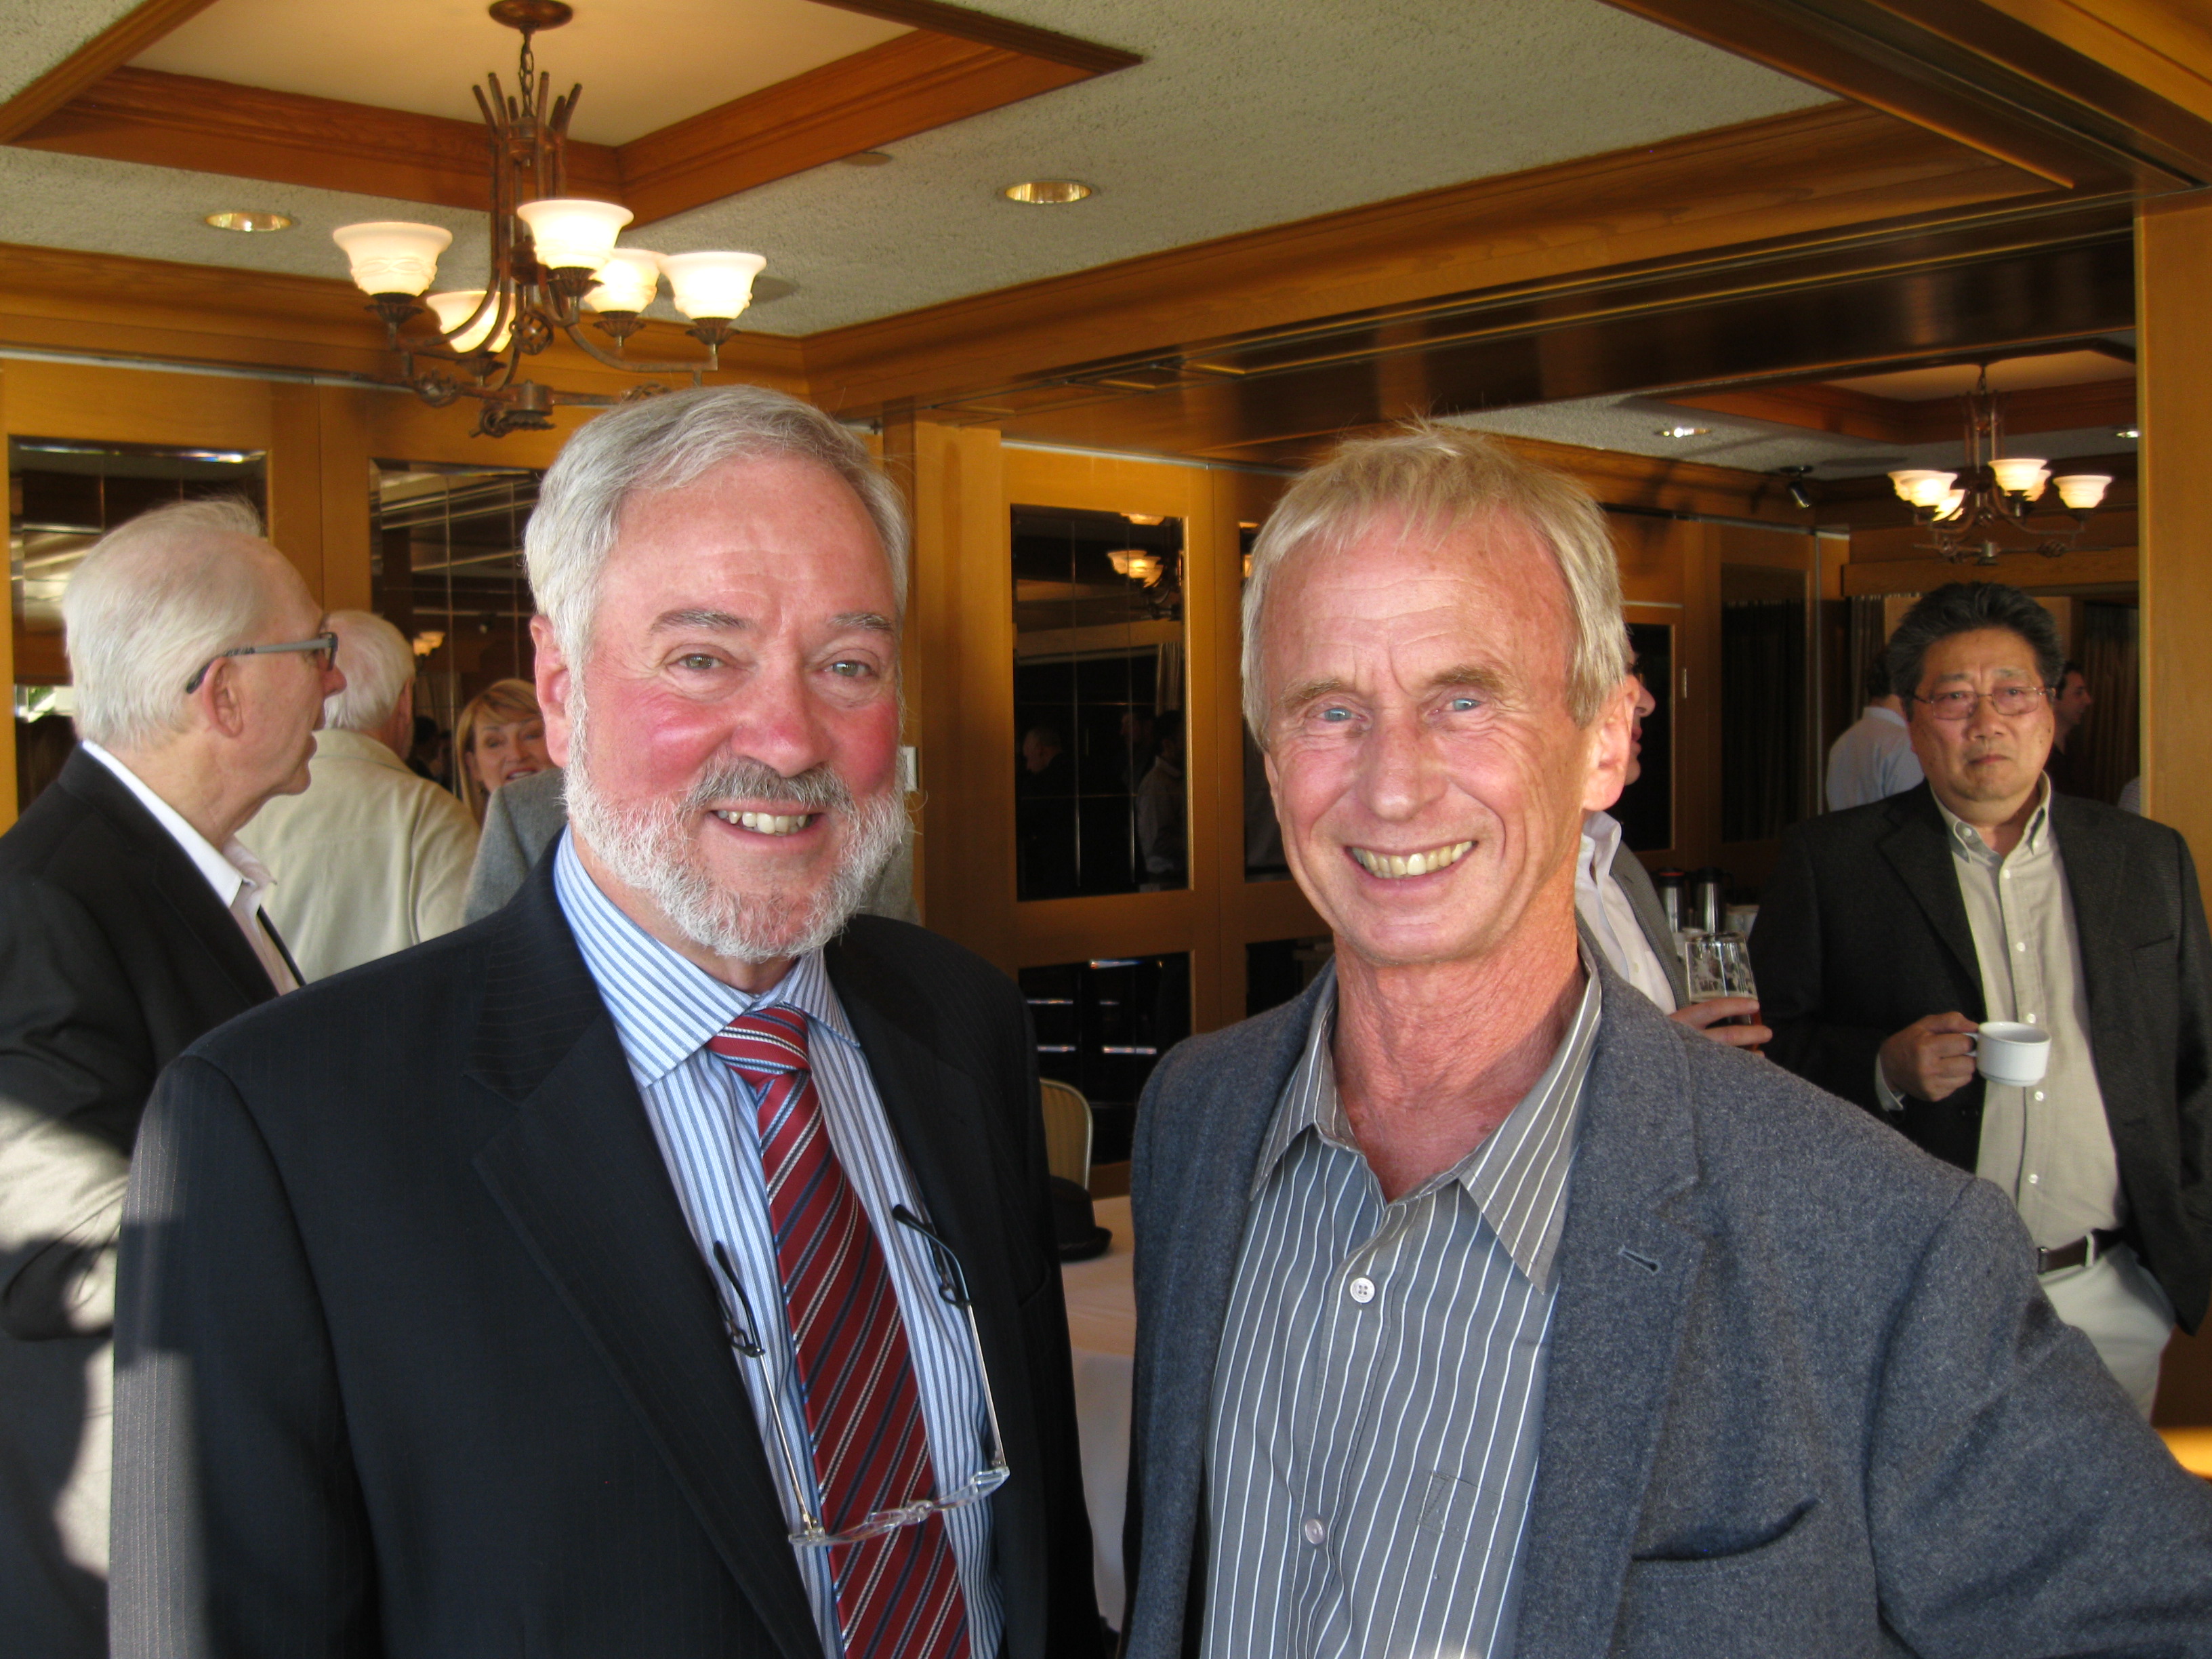 Ken Harford and Doug Kennedy at Harford's retirement party, April 29, 2016.